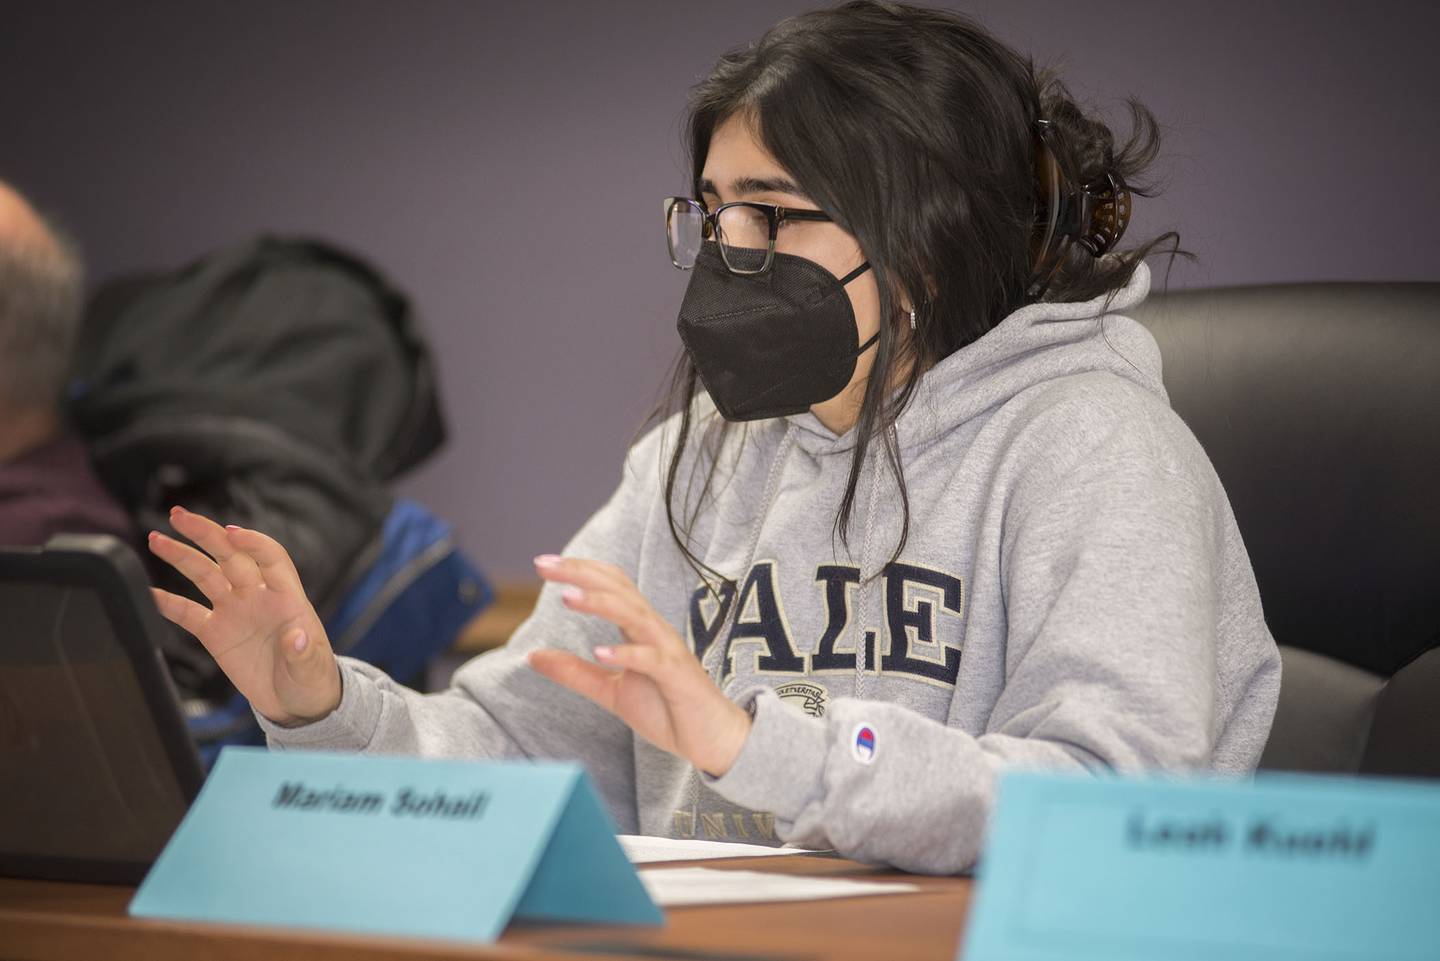 Miriam Sohail, Dixon High School senior, speaks during the Tuesday afternoon meeting. Sohail was one of two students on the Community Engagement Committee.